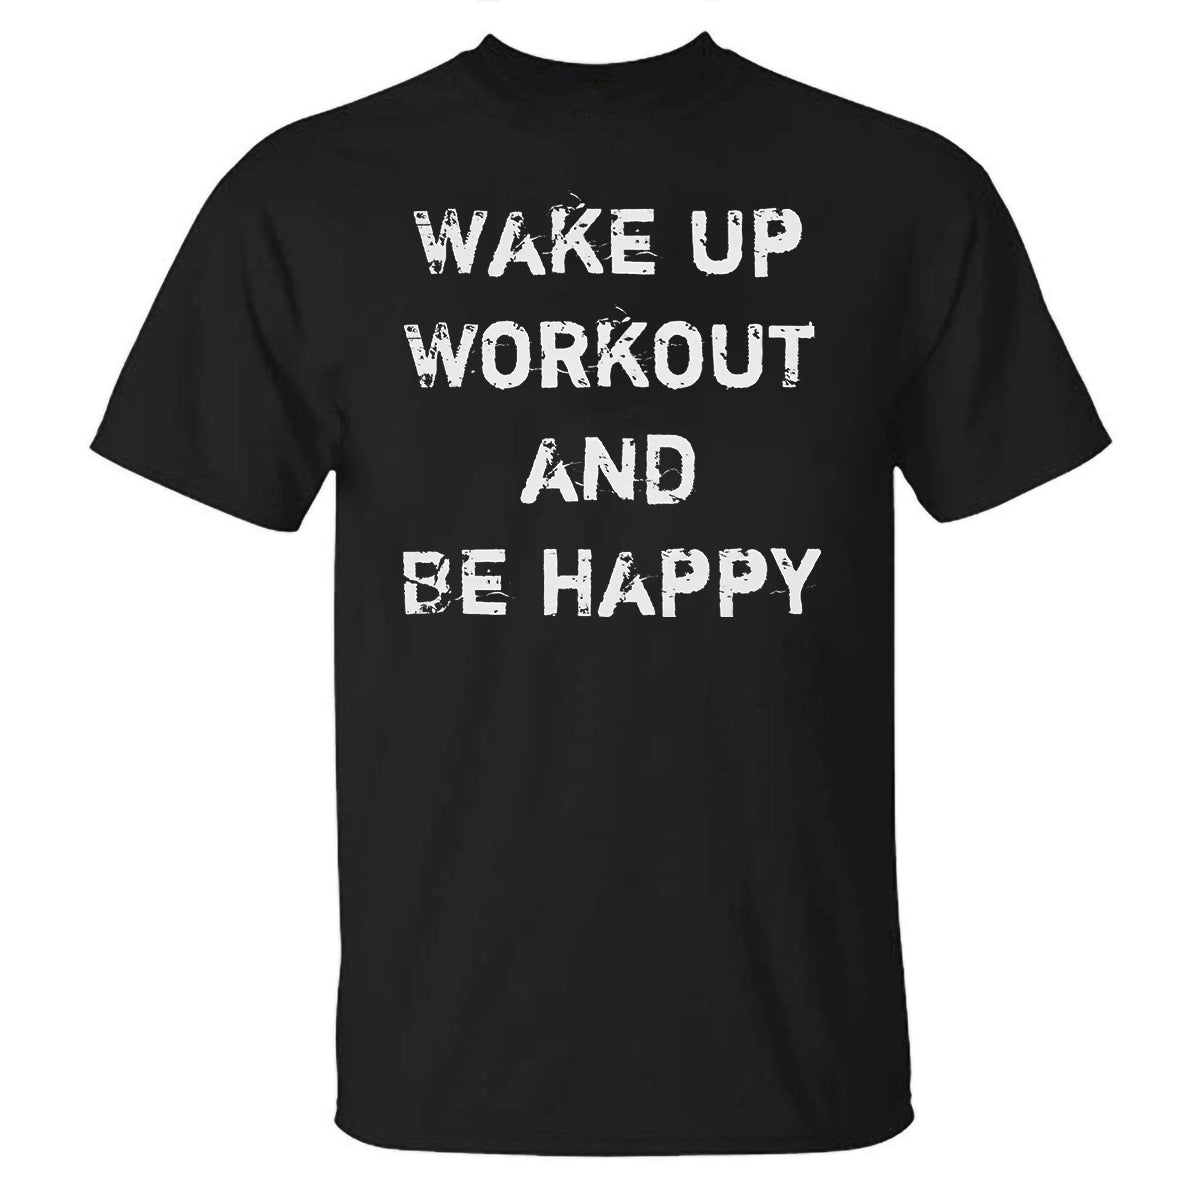 Wake Up Workout And Be Happy Printed T-shirt